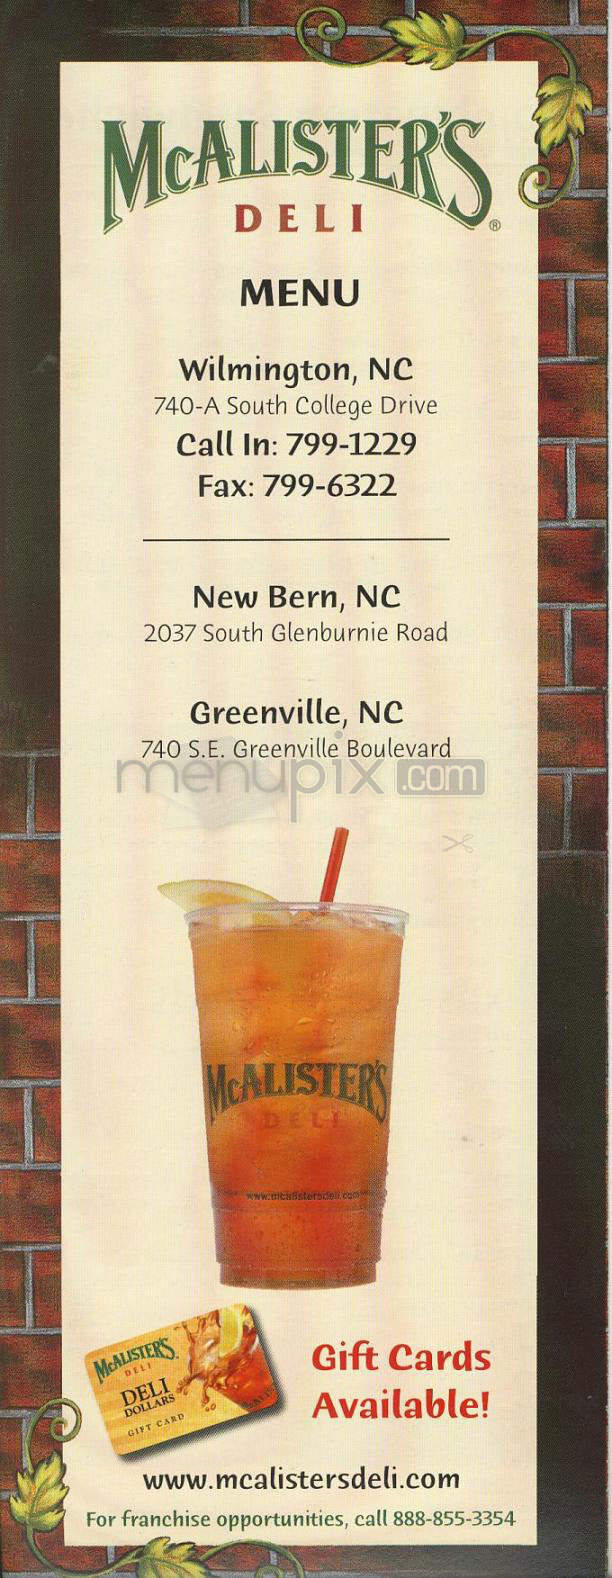 /2404365/McAlisters-Deli-Southaven-MS - Southaven, MS